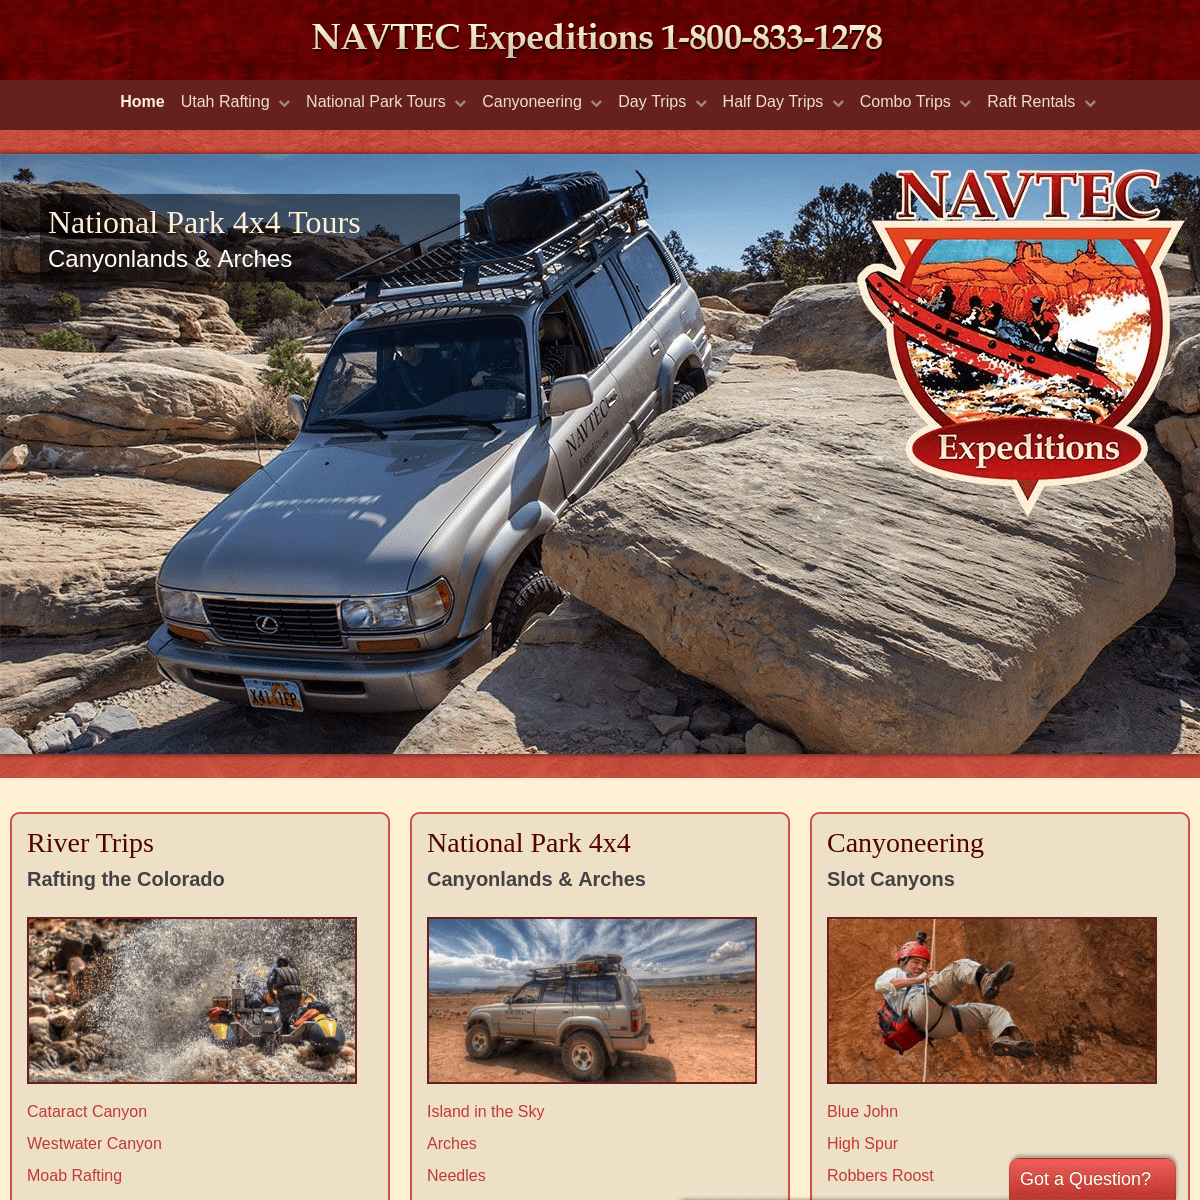 NAVTEC Expeditions - Home